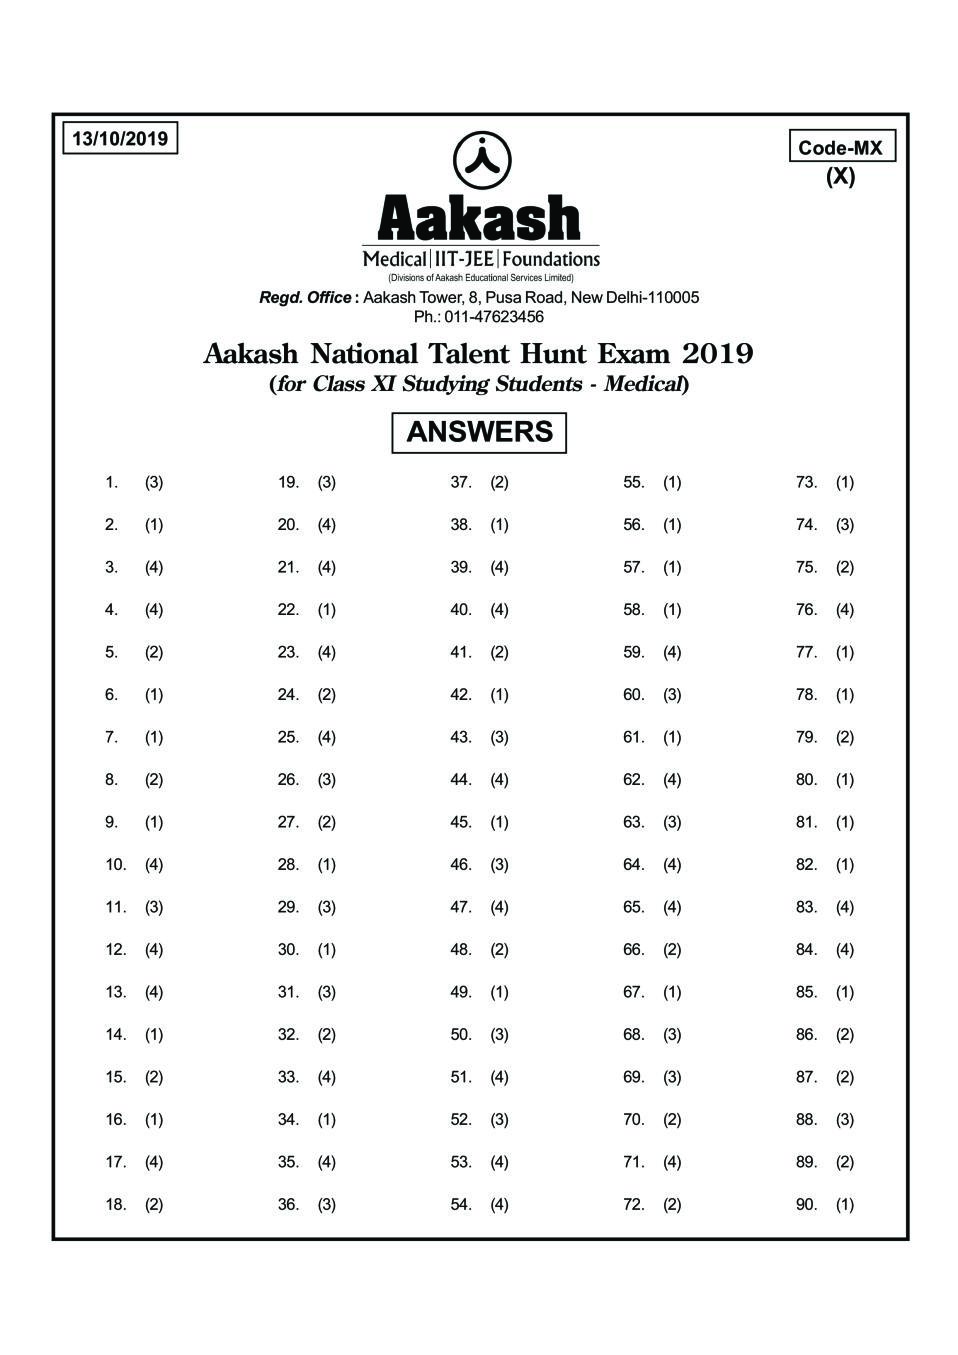 ANTHE 2019 Class 11 Answer Key (Medical) Code MX - Page 1